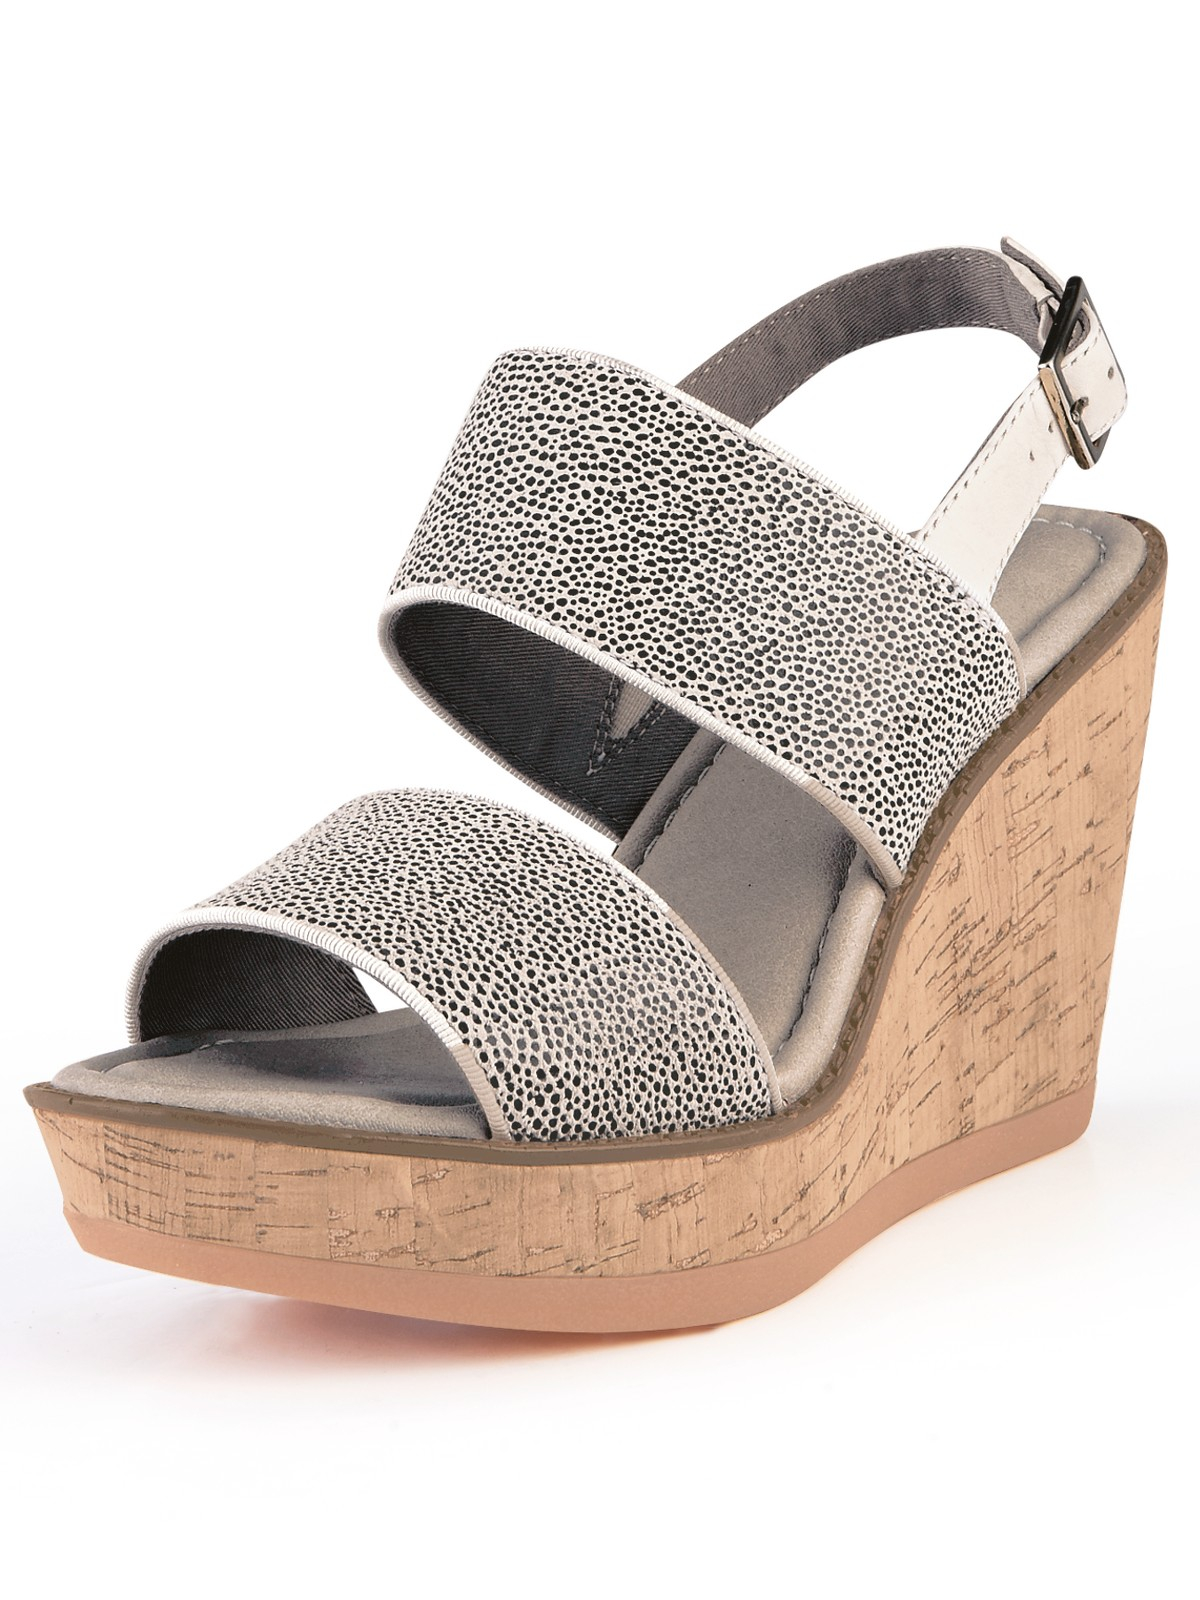 Hush Puppies® Hush Puppies Cores Sling Wedge Sandals in Gray (white ...